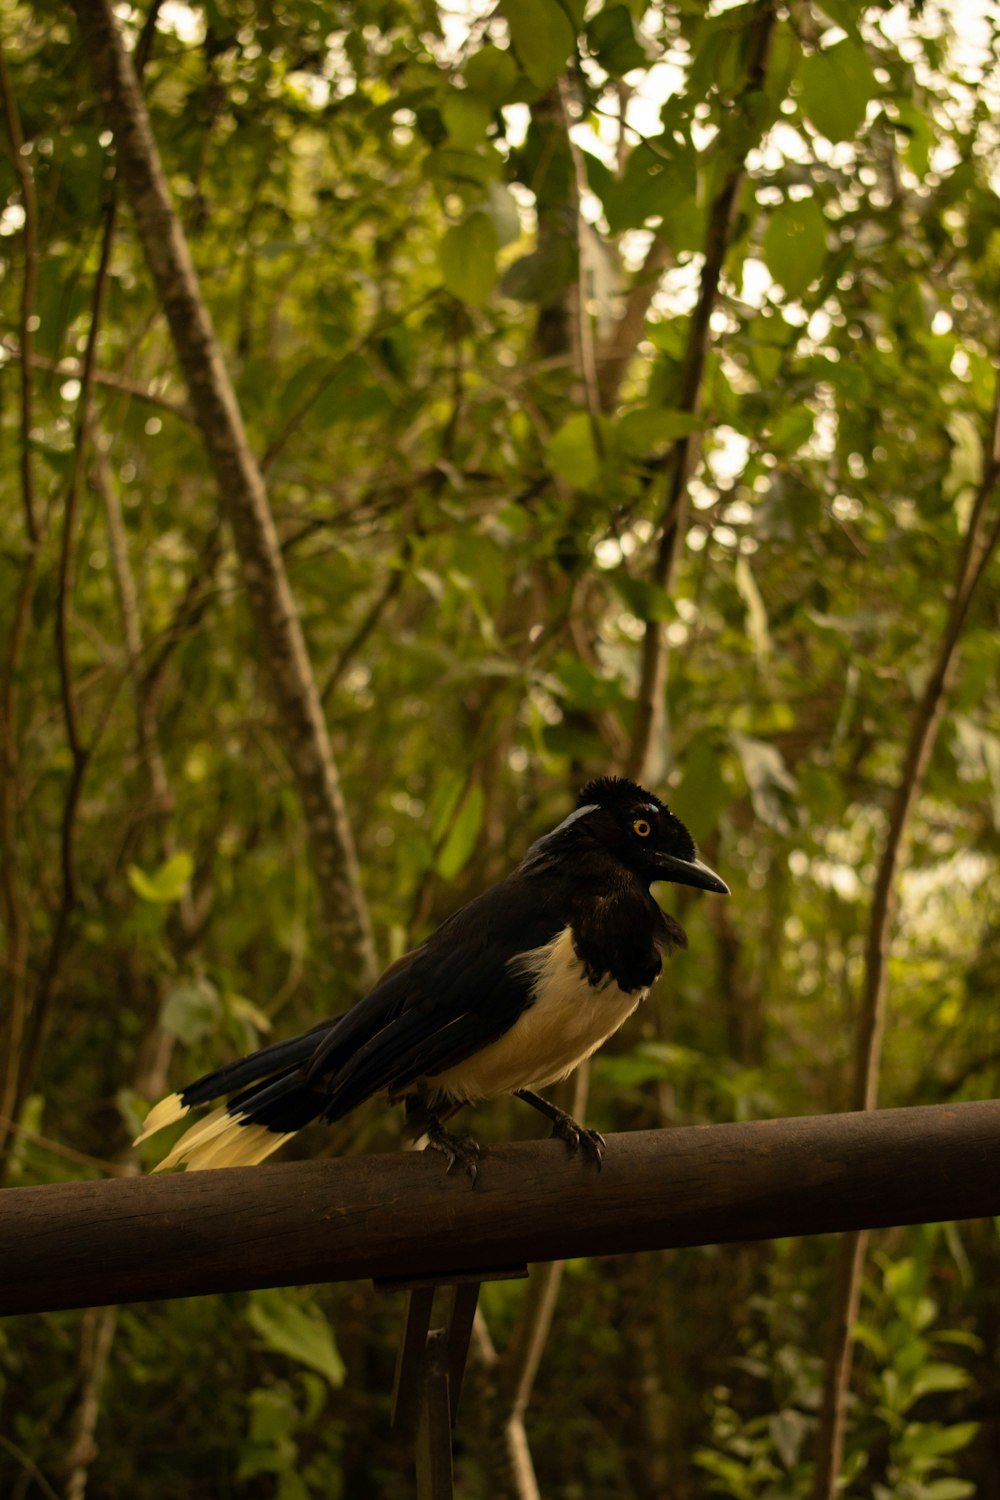 a black and white bird sitting on a rail